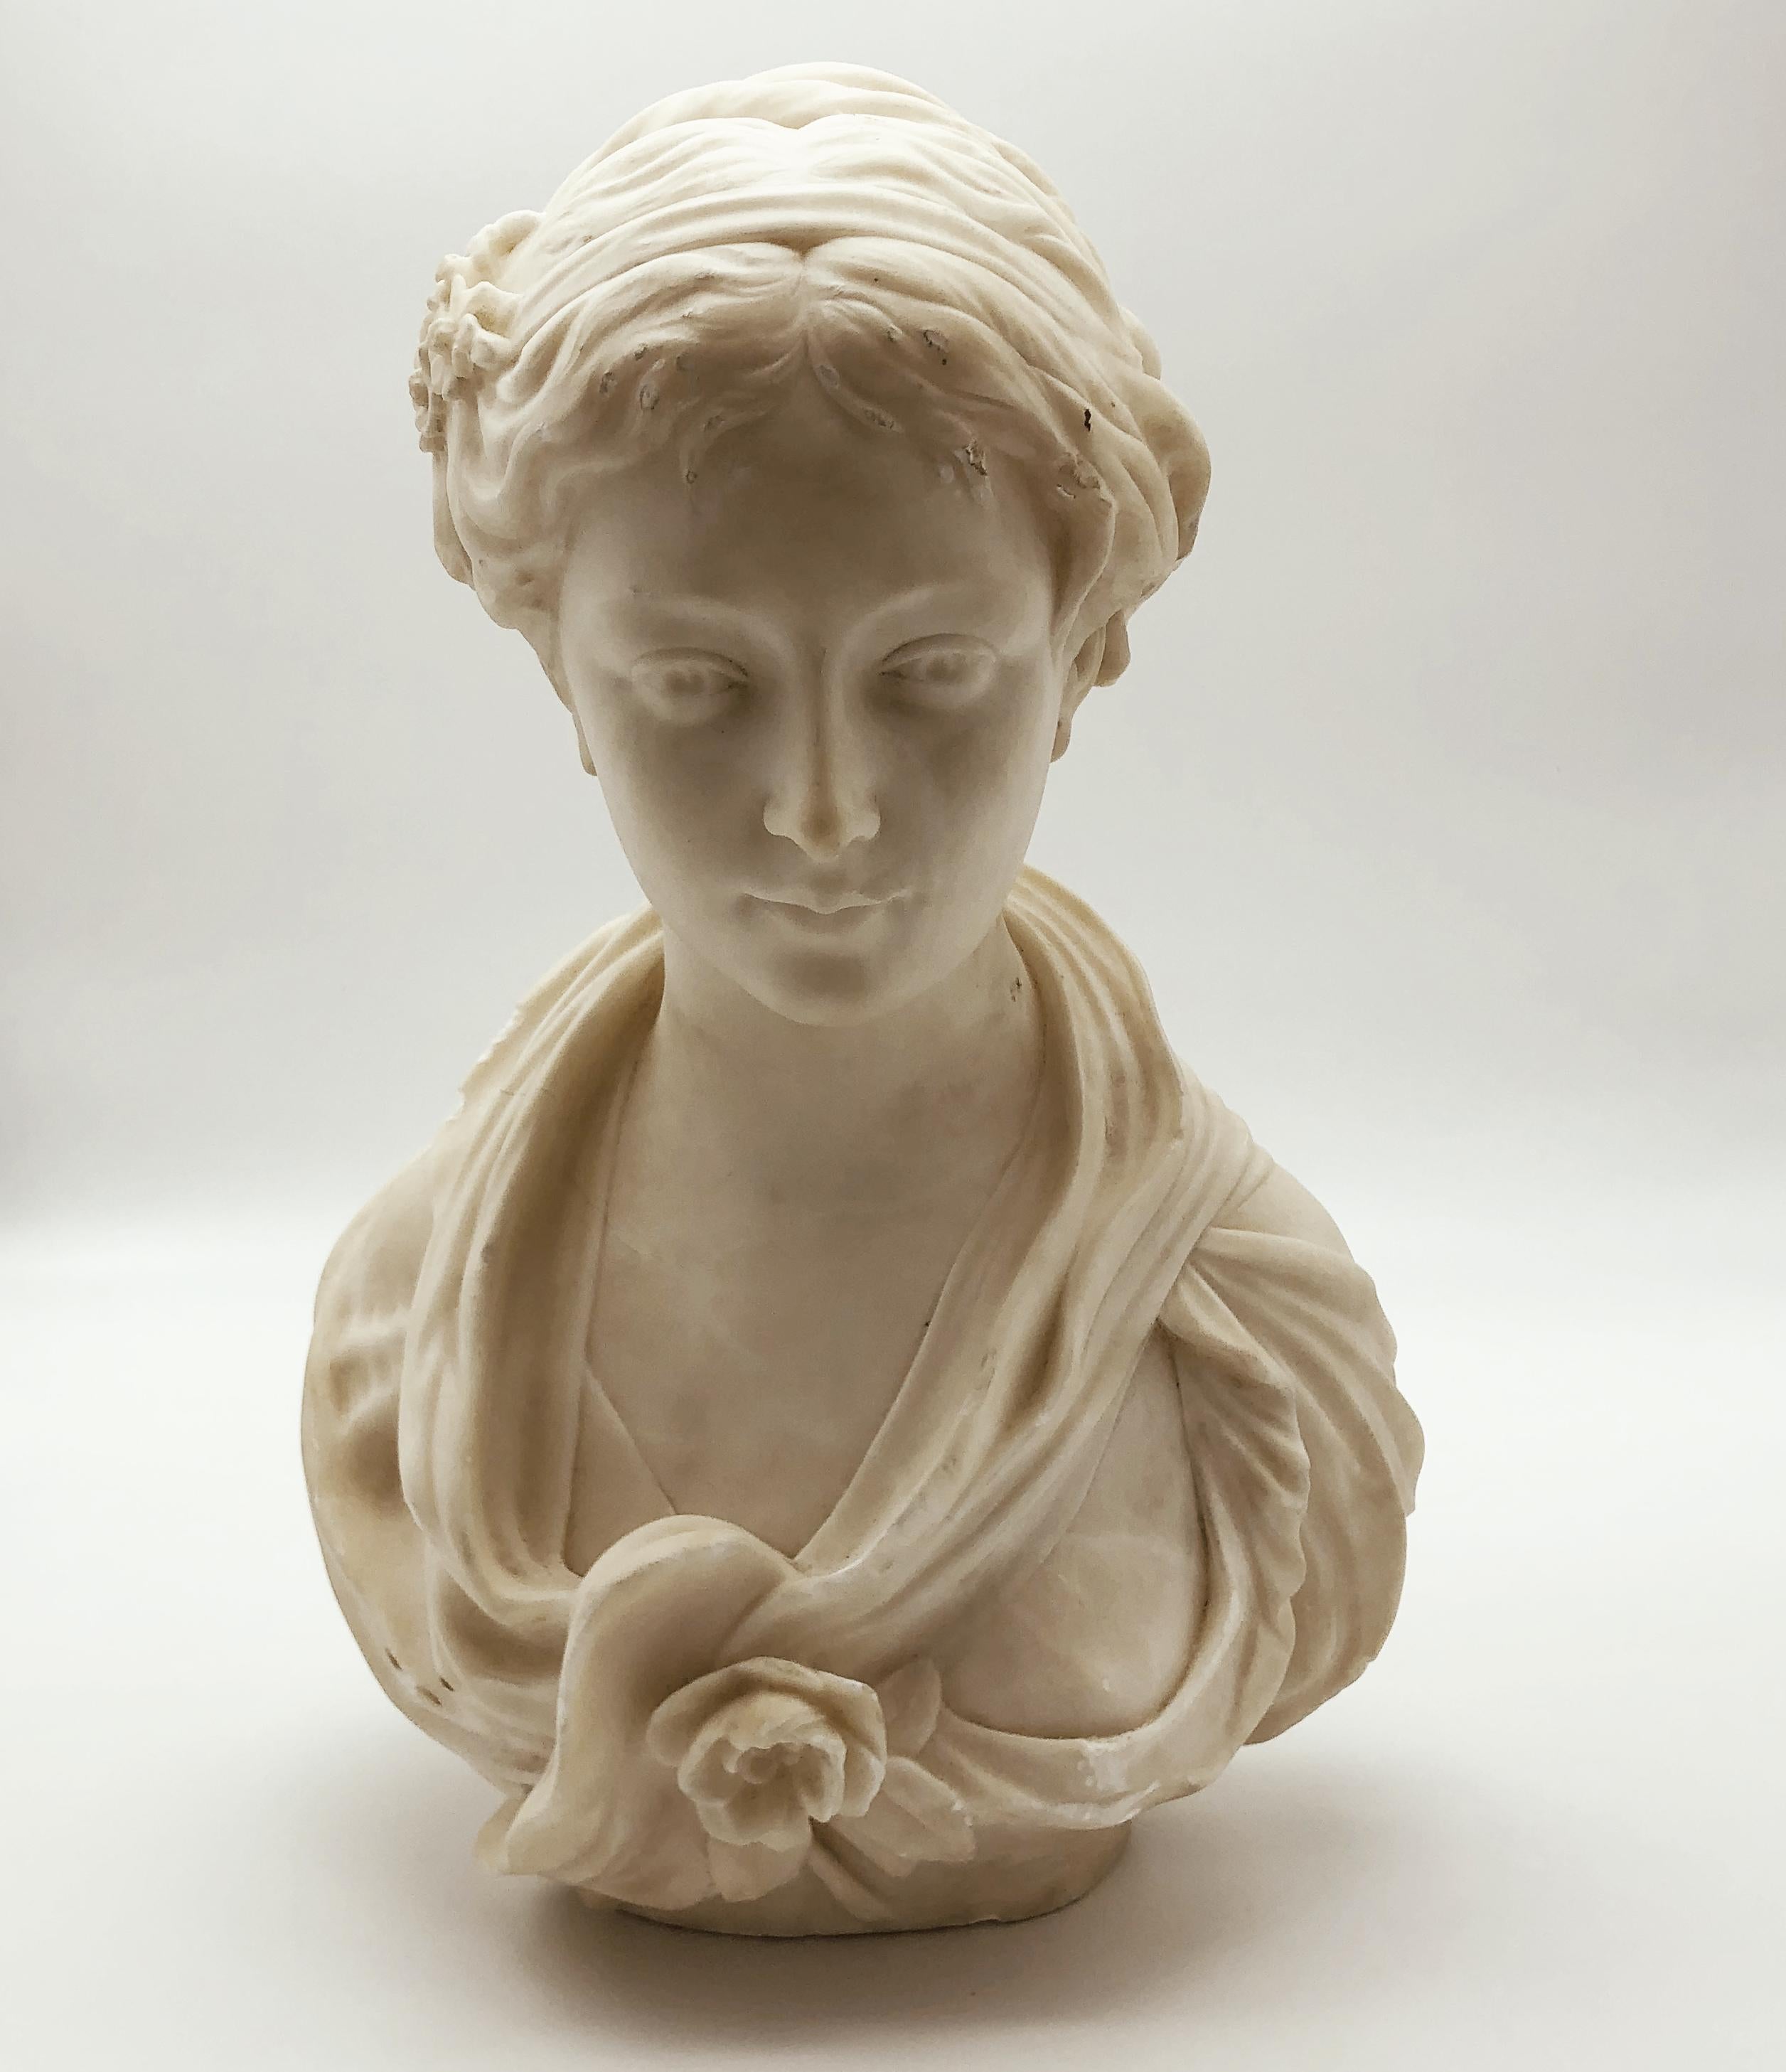 A very nice and sculpture in marble carved and signed by the French sculptor Gregoire, a very well know and one of the most important exponent of the French Neoclassicism. The sculpture a portrait of a young woman express the quality and the style